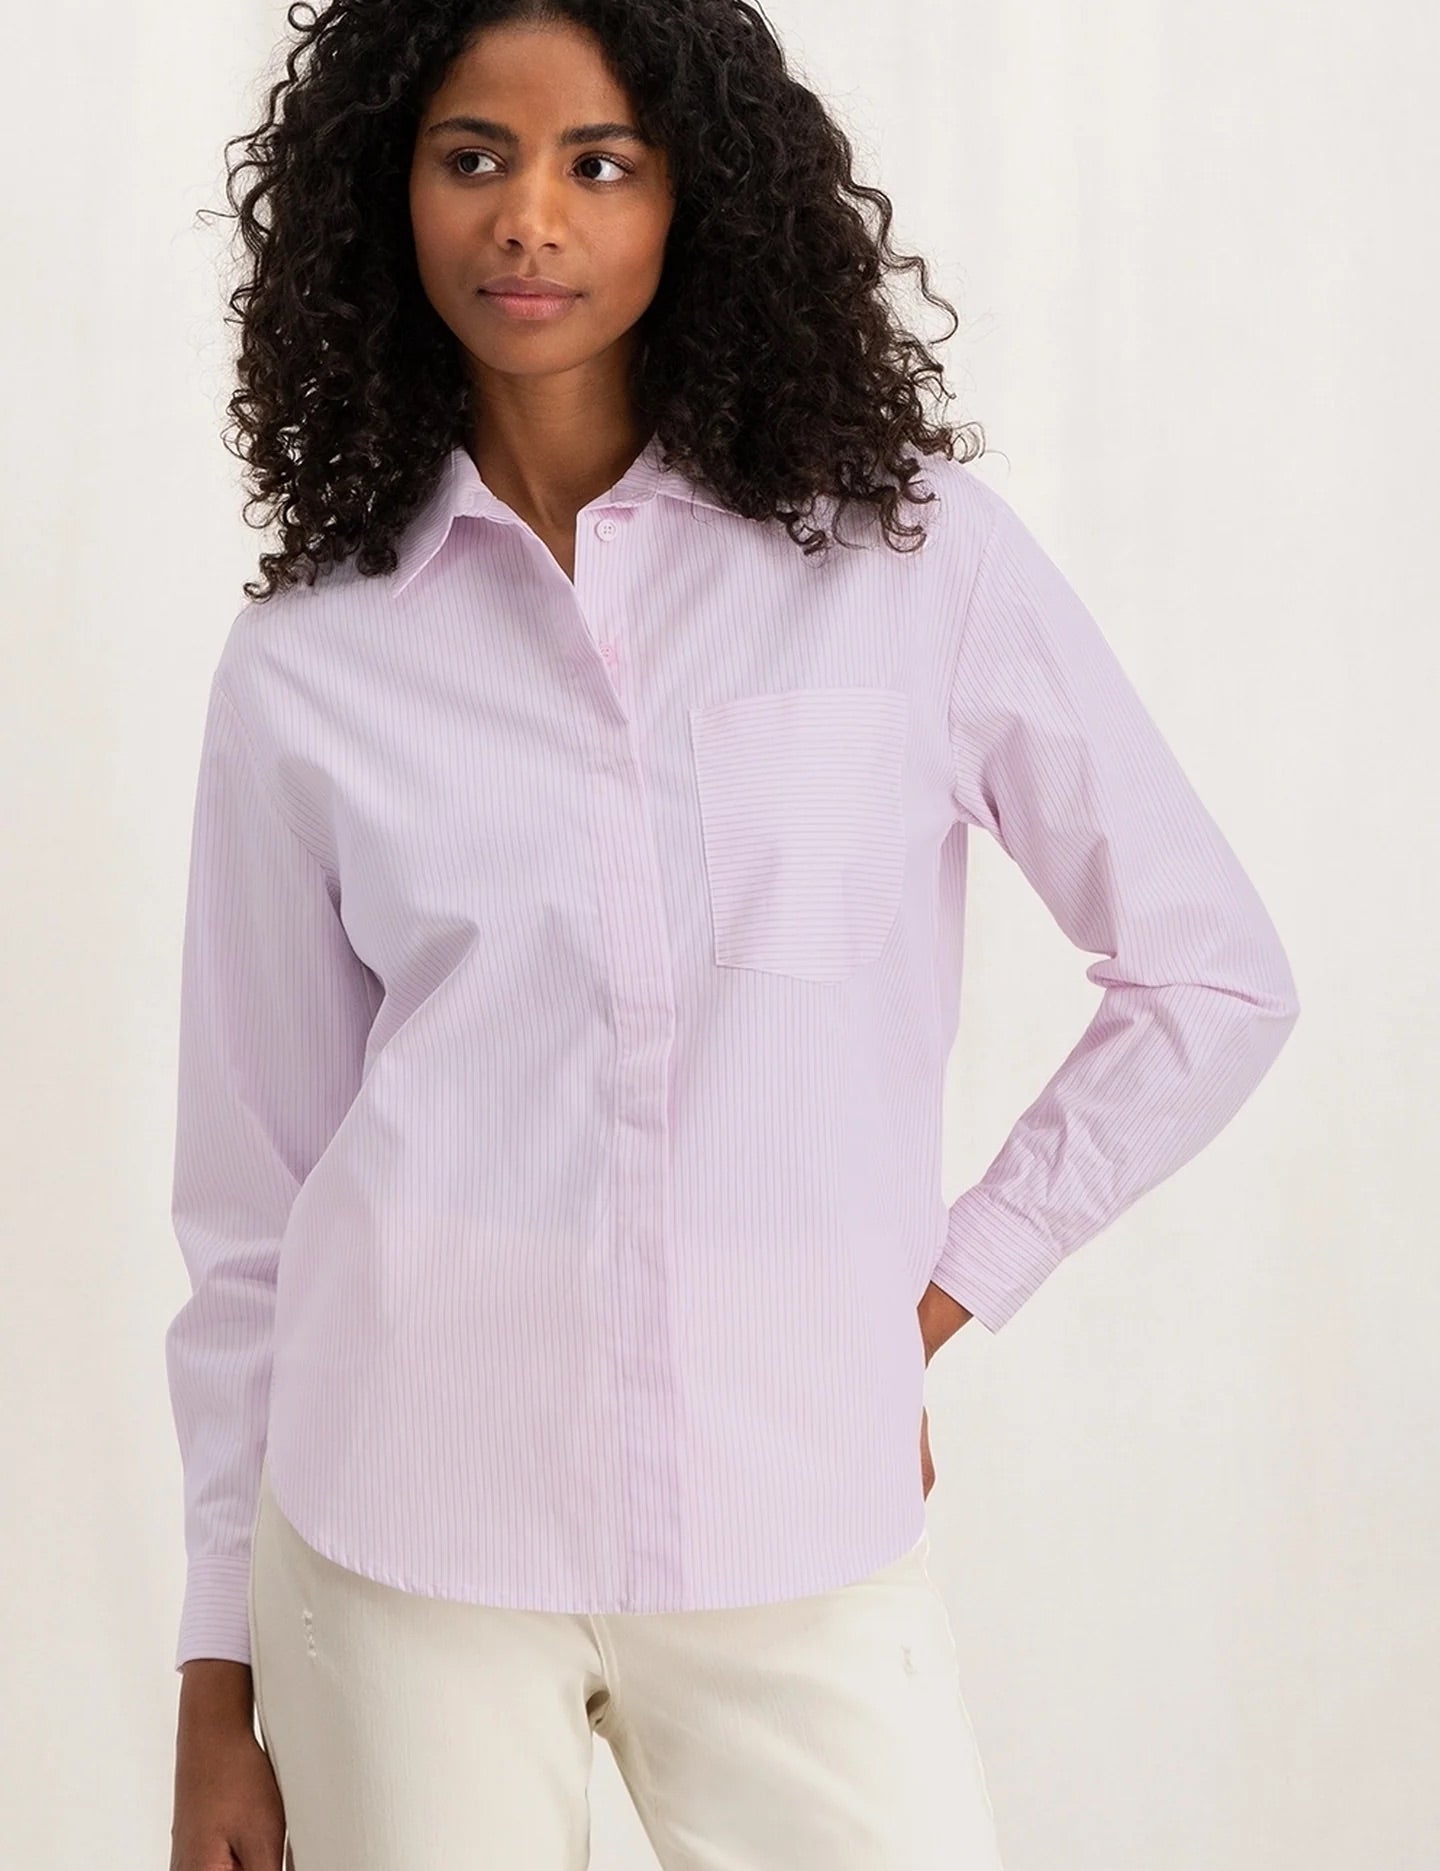 striped-blouse-with-long-sleeves-pocket-and-buttons-lady-pink-dessin_bc0f625d-89fe-450c-a246-b4faab8337e1_2880x_jpg.jpg